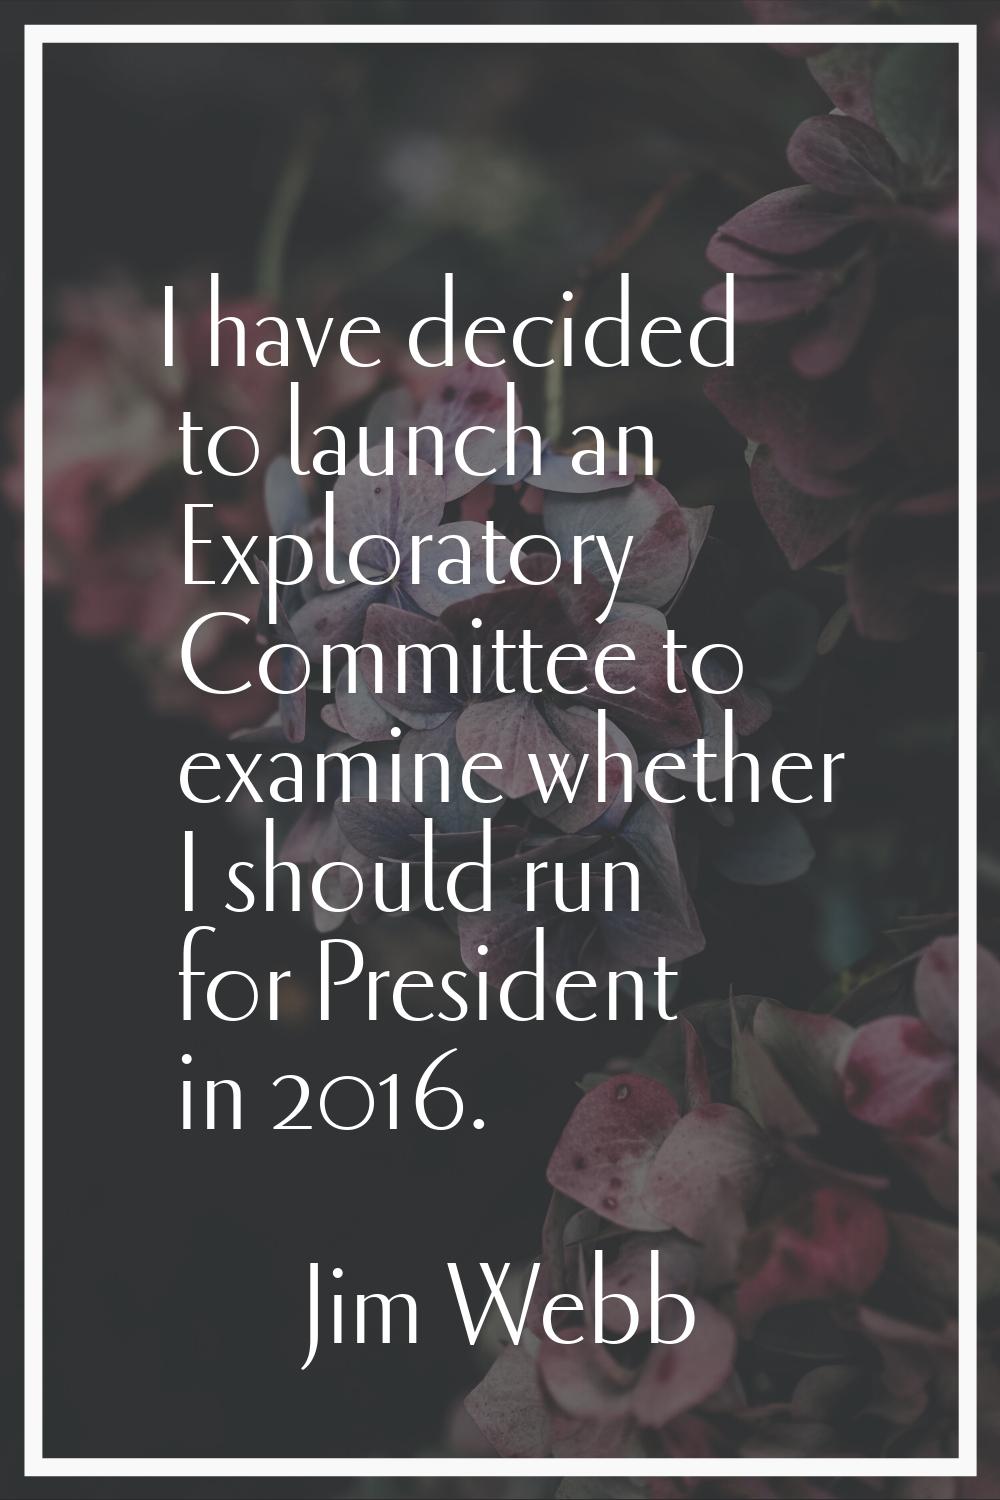 I have decided to launch an Exploratory Committee to examine whether I should run for President in 